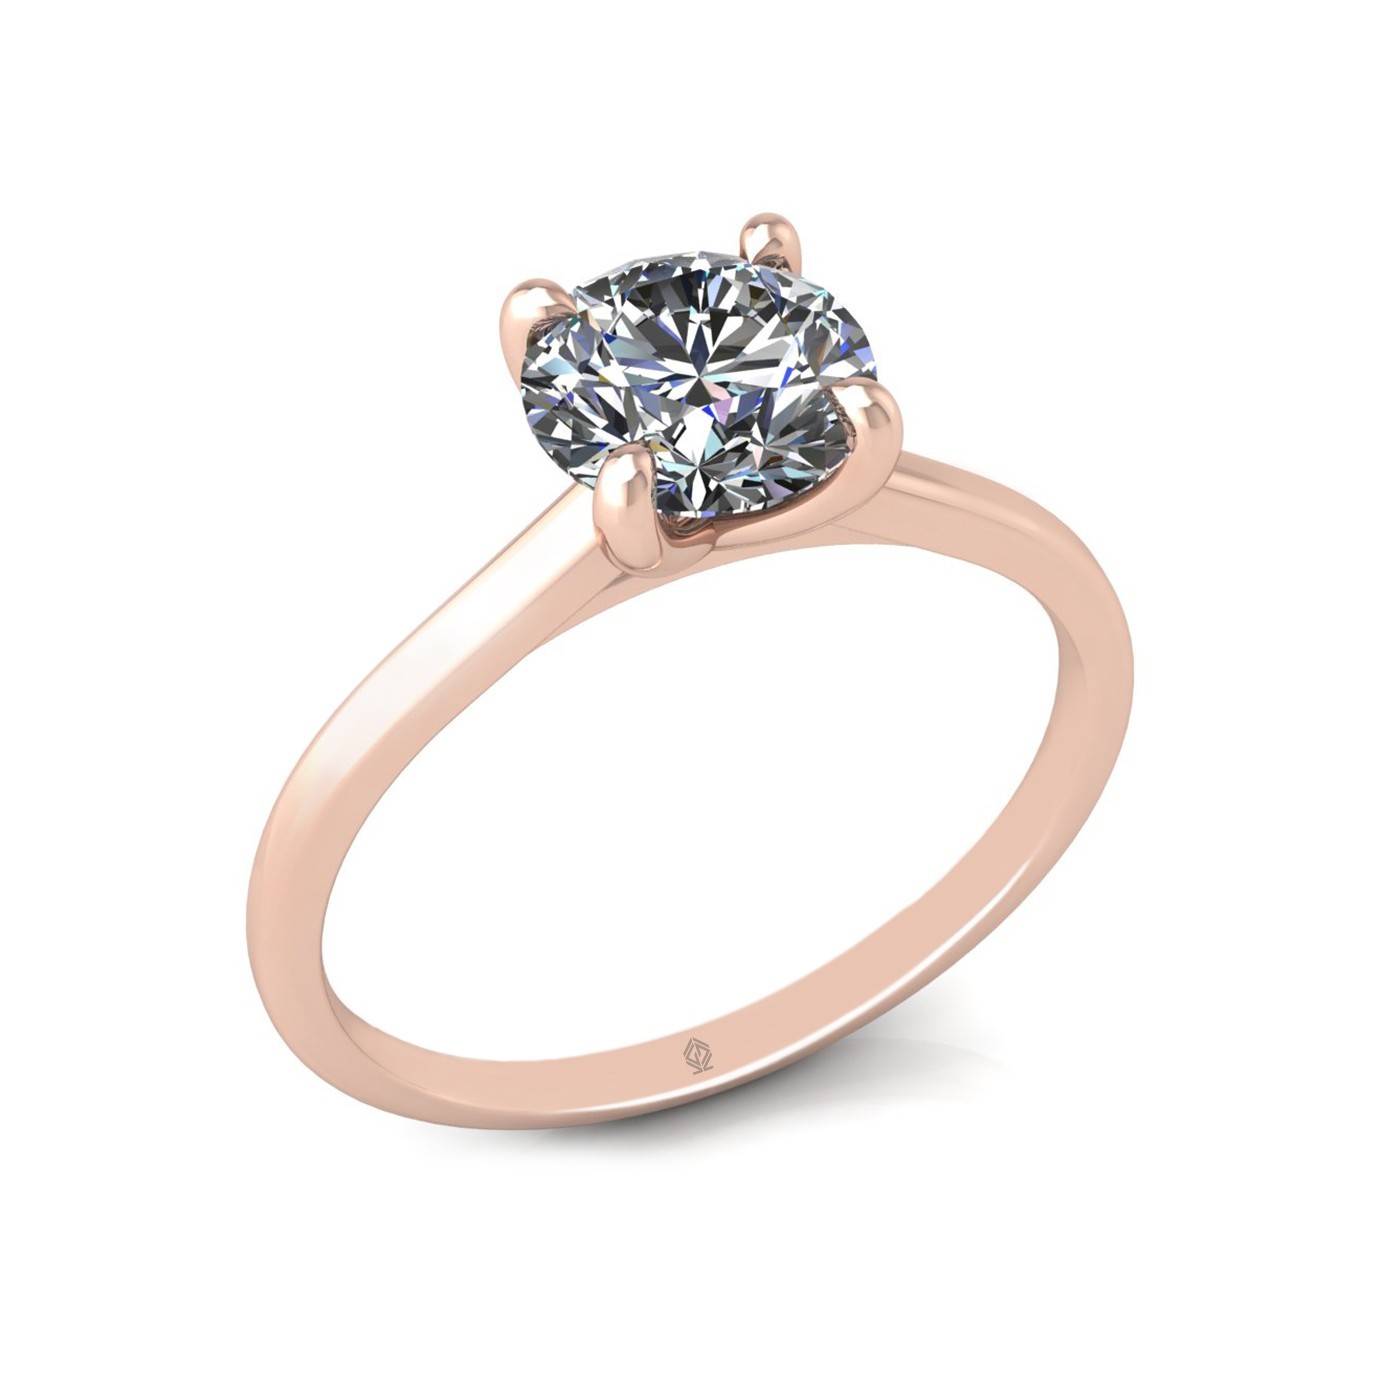 18K ROSE GOLD 4 PRONGS SOLITAIRE ROUND CUT DIAMOND ENGAGEMENT RING WITH WHISPER THIN BAND